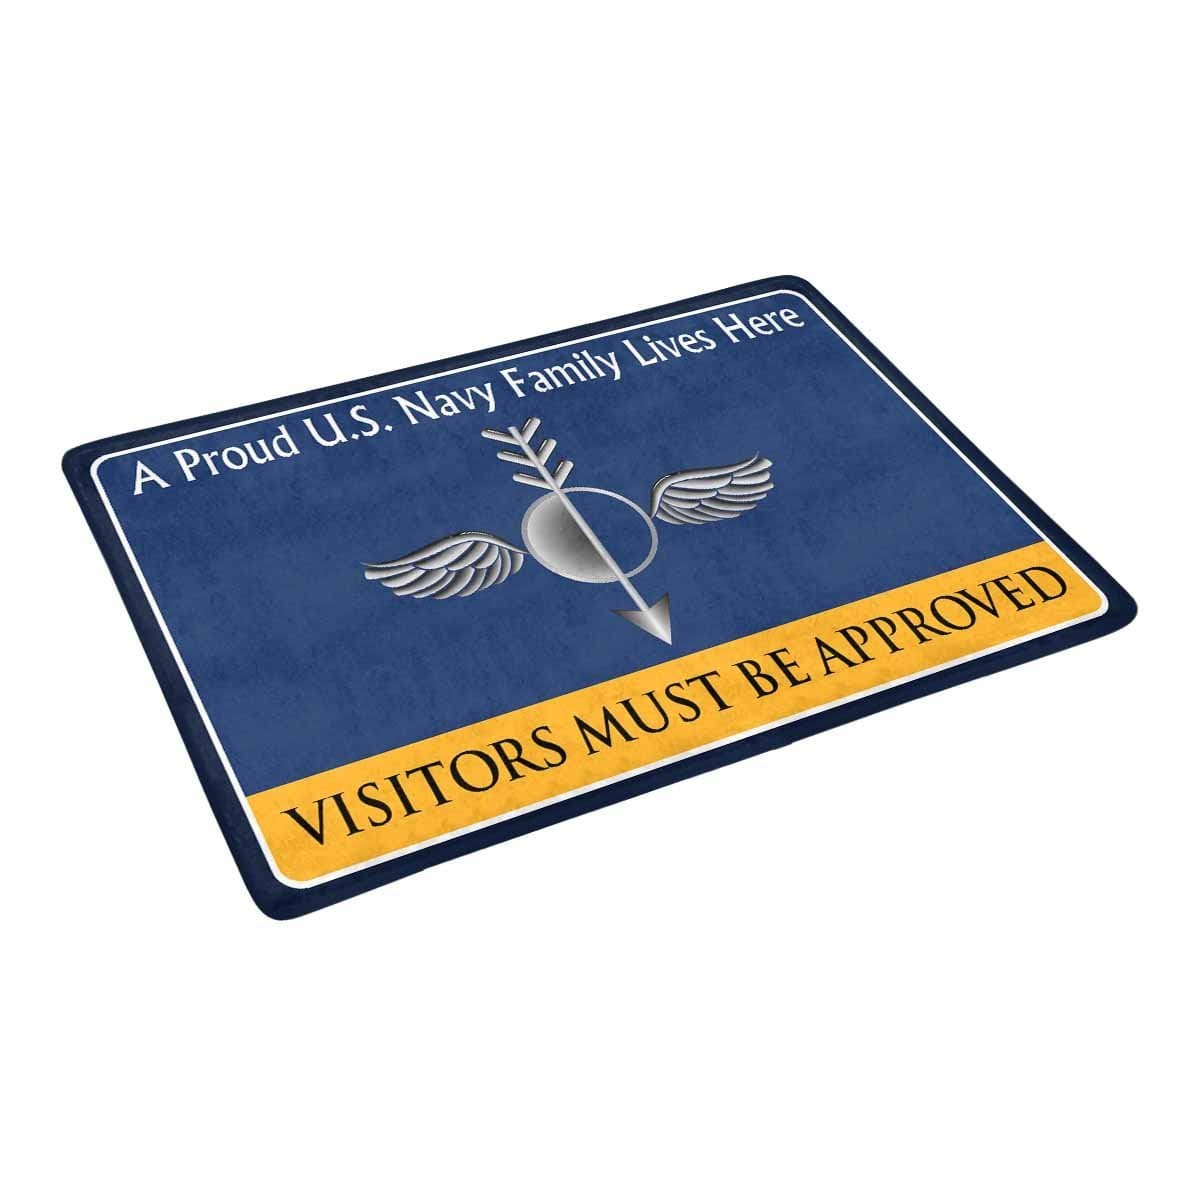 Navy Aerographers Mate Navy AG Family Doormat - Visitors must be approved (23,6 inches x 15,7 inches)-Doormat-Navy-Rate-Veterans Nation